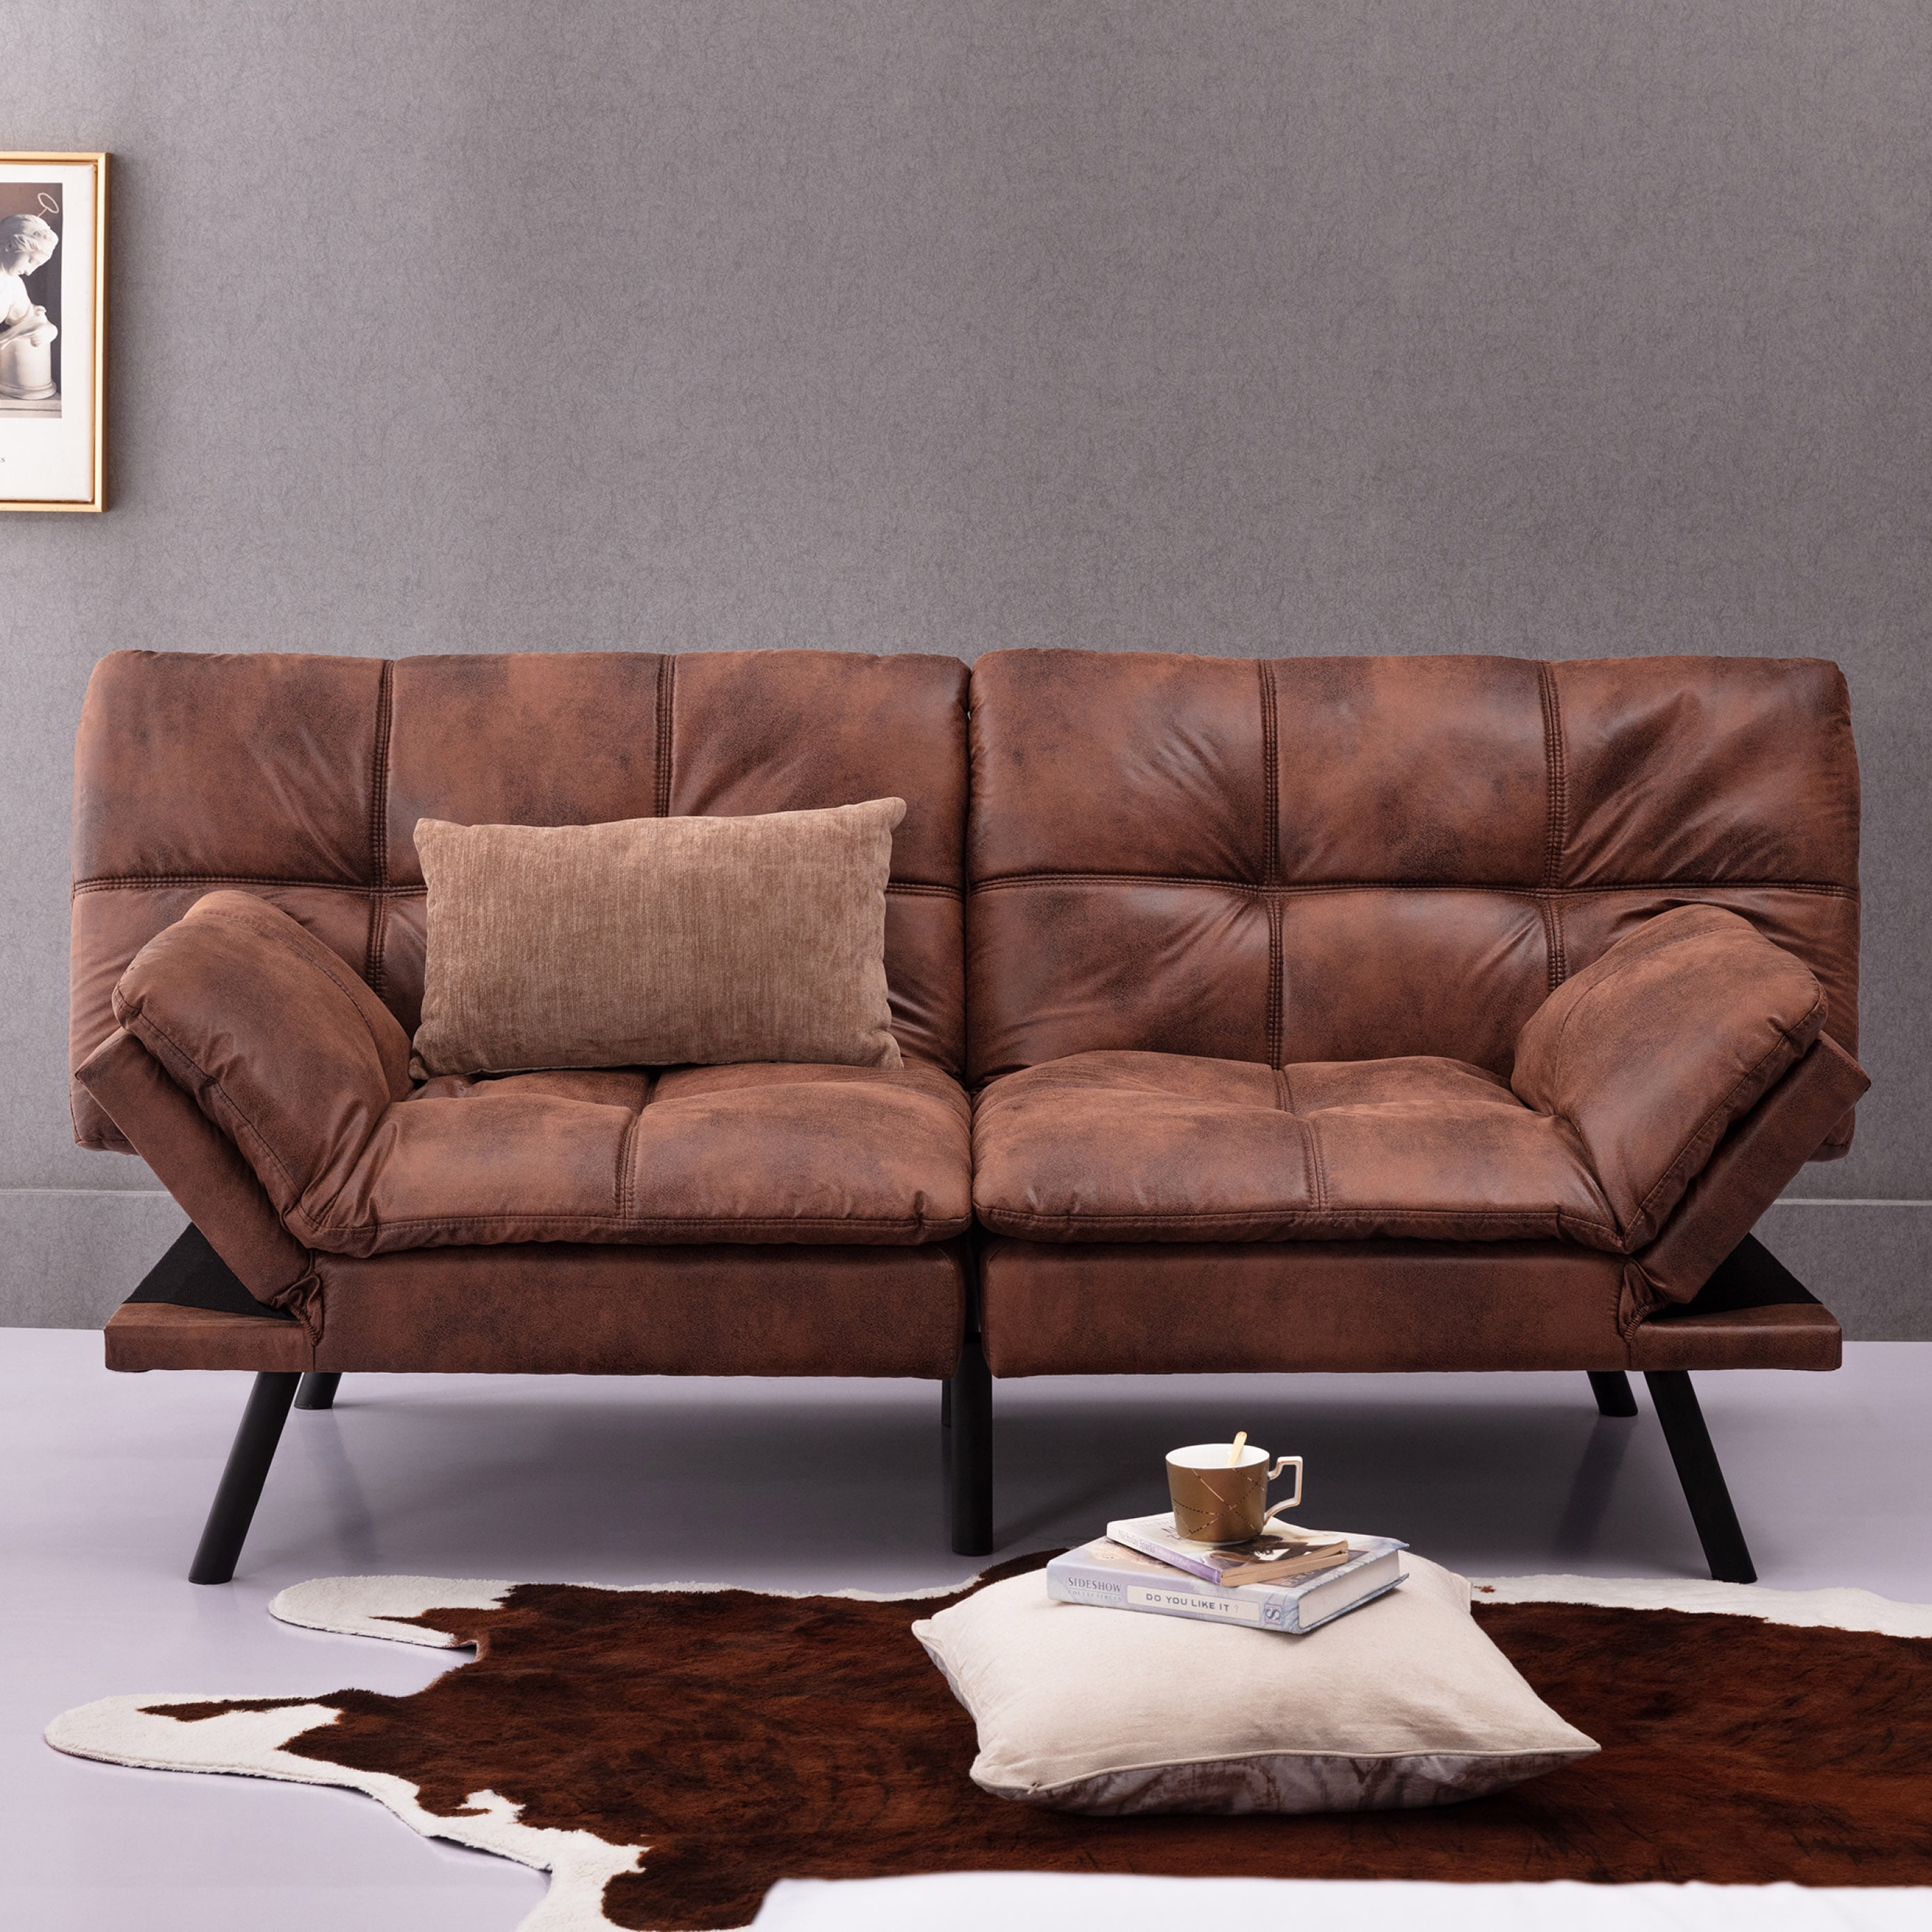 Modern Faux Leather Futon with Memory Foam and Adjustable Armrests. - On  Sale - Bed Bath & Beyond - 37174381